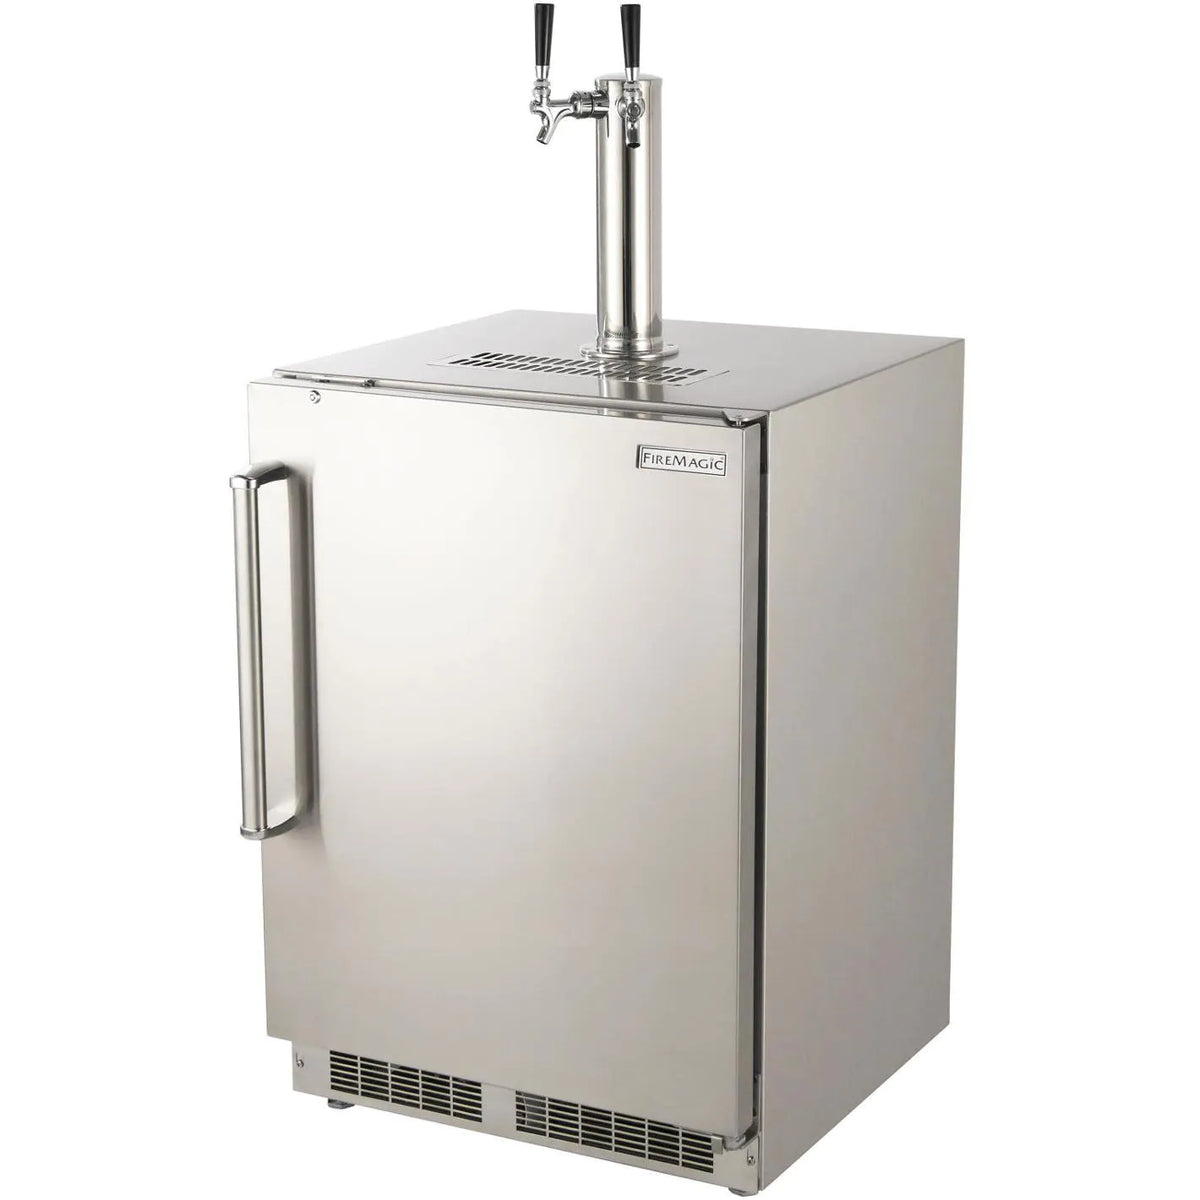 Fire Magic 24 Inch Outdoor Rated Dual Tap Kegerator